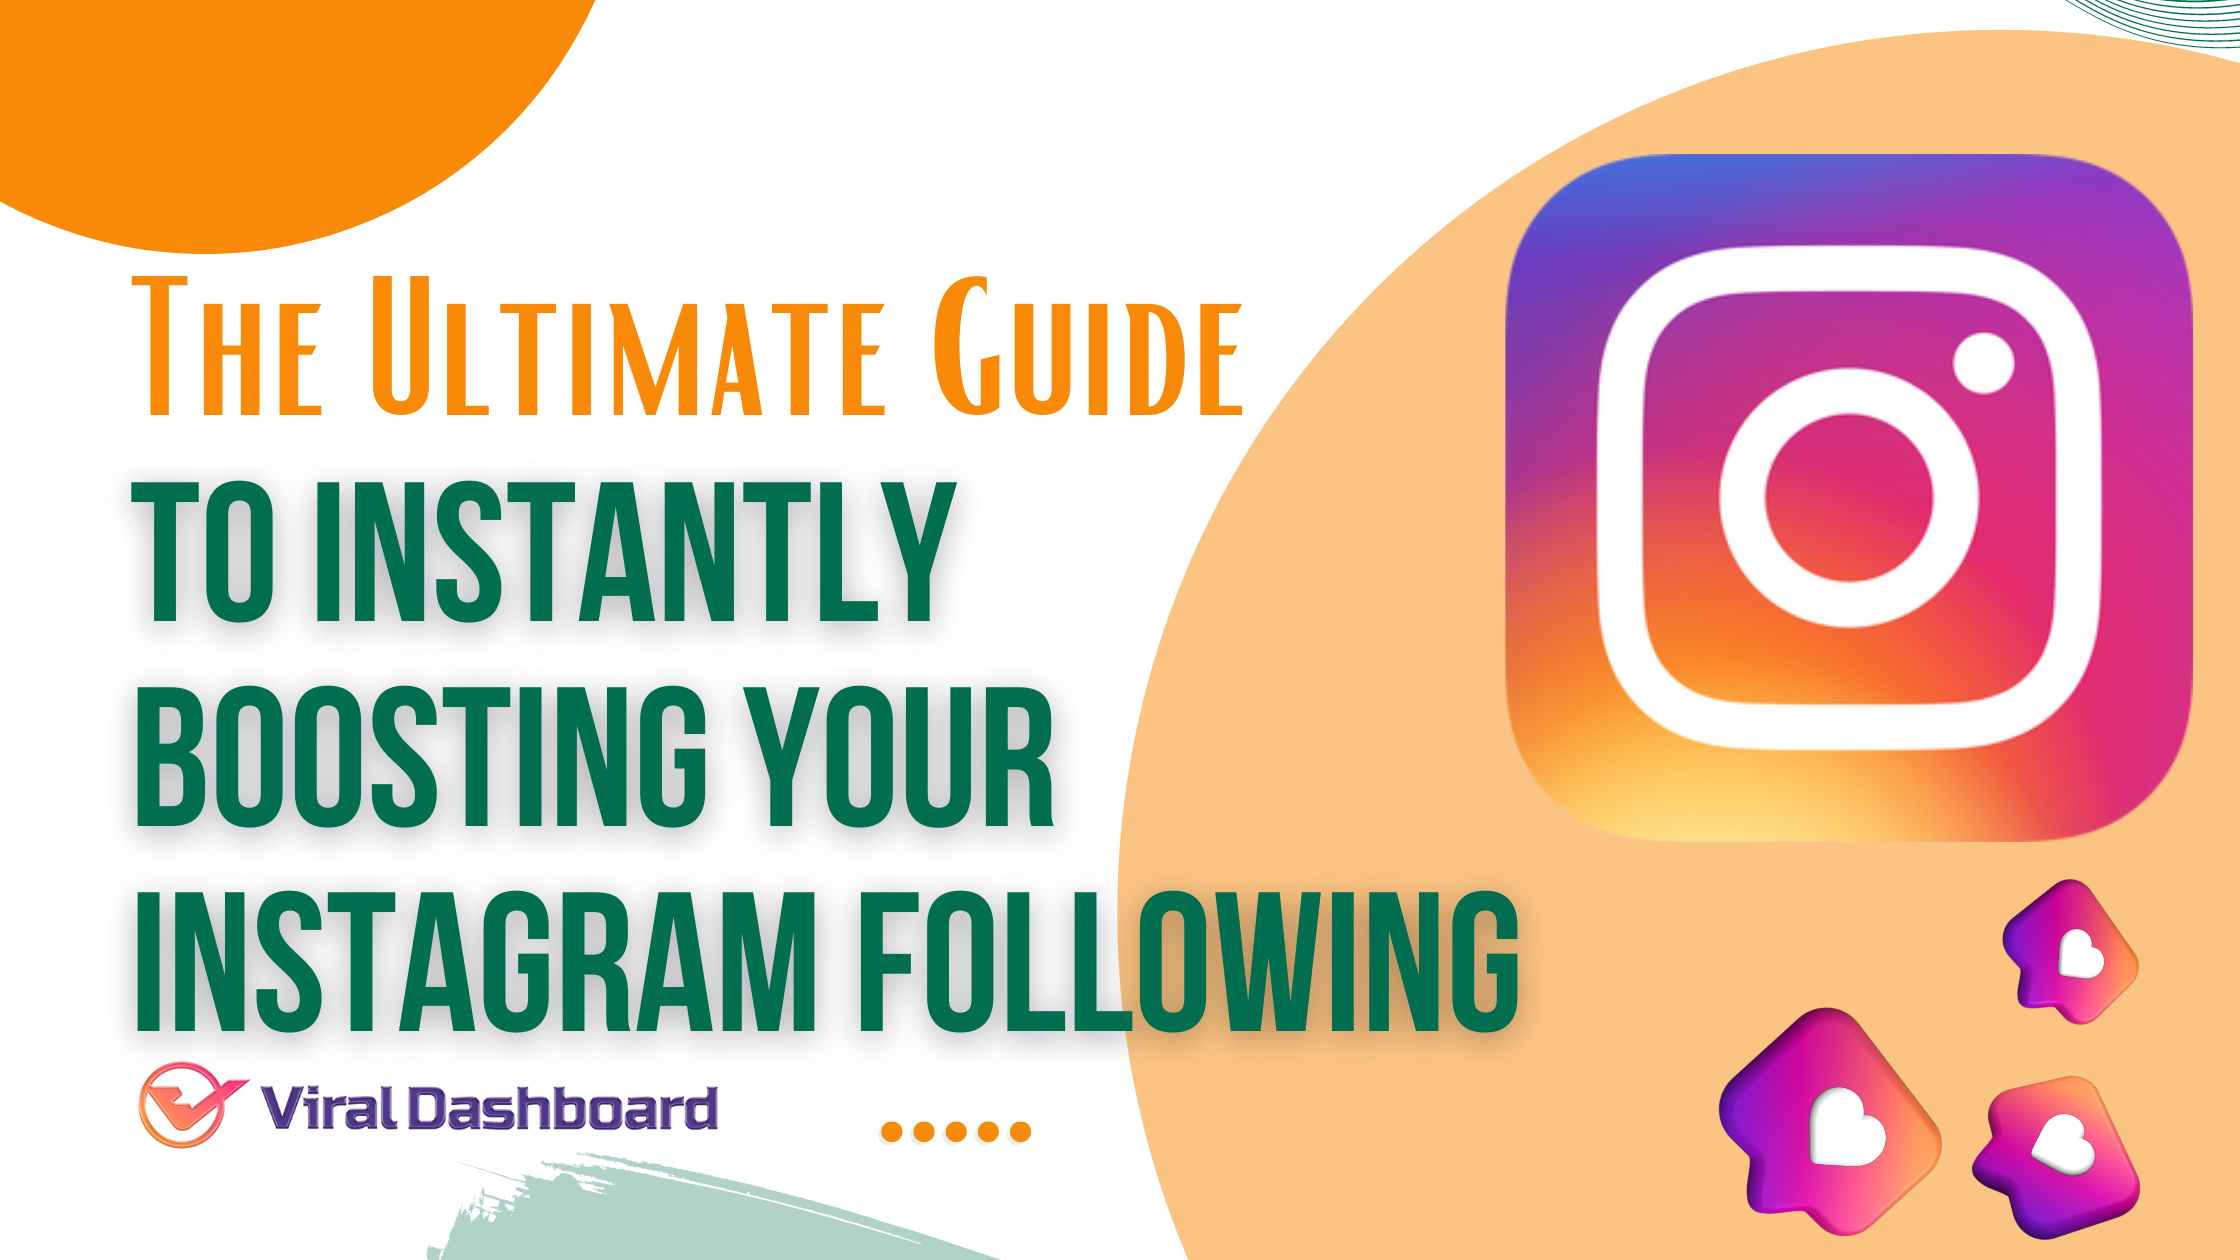 The Ultimate Guide to Instantly Boosting Your Instagram Following